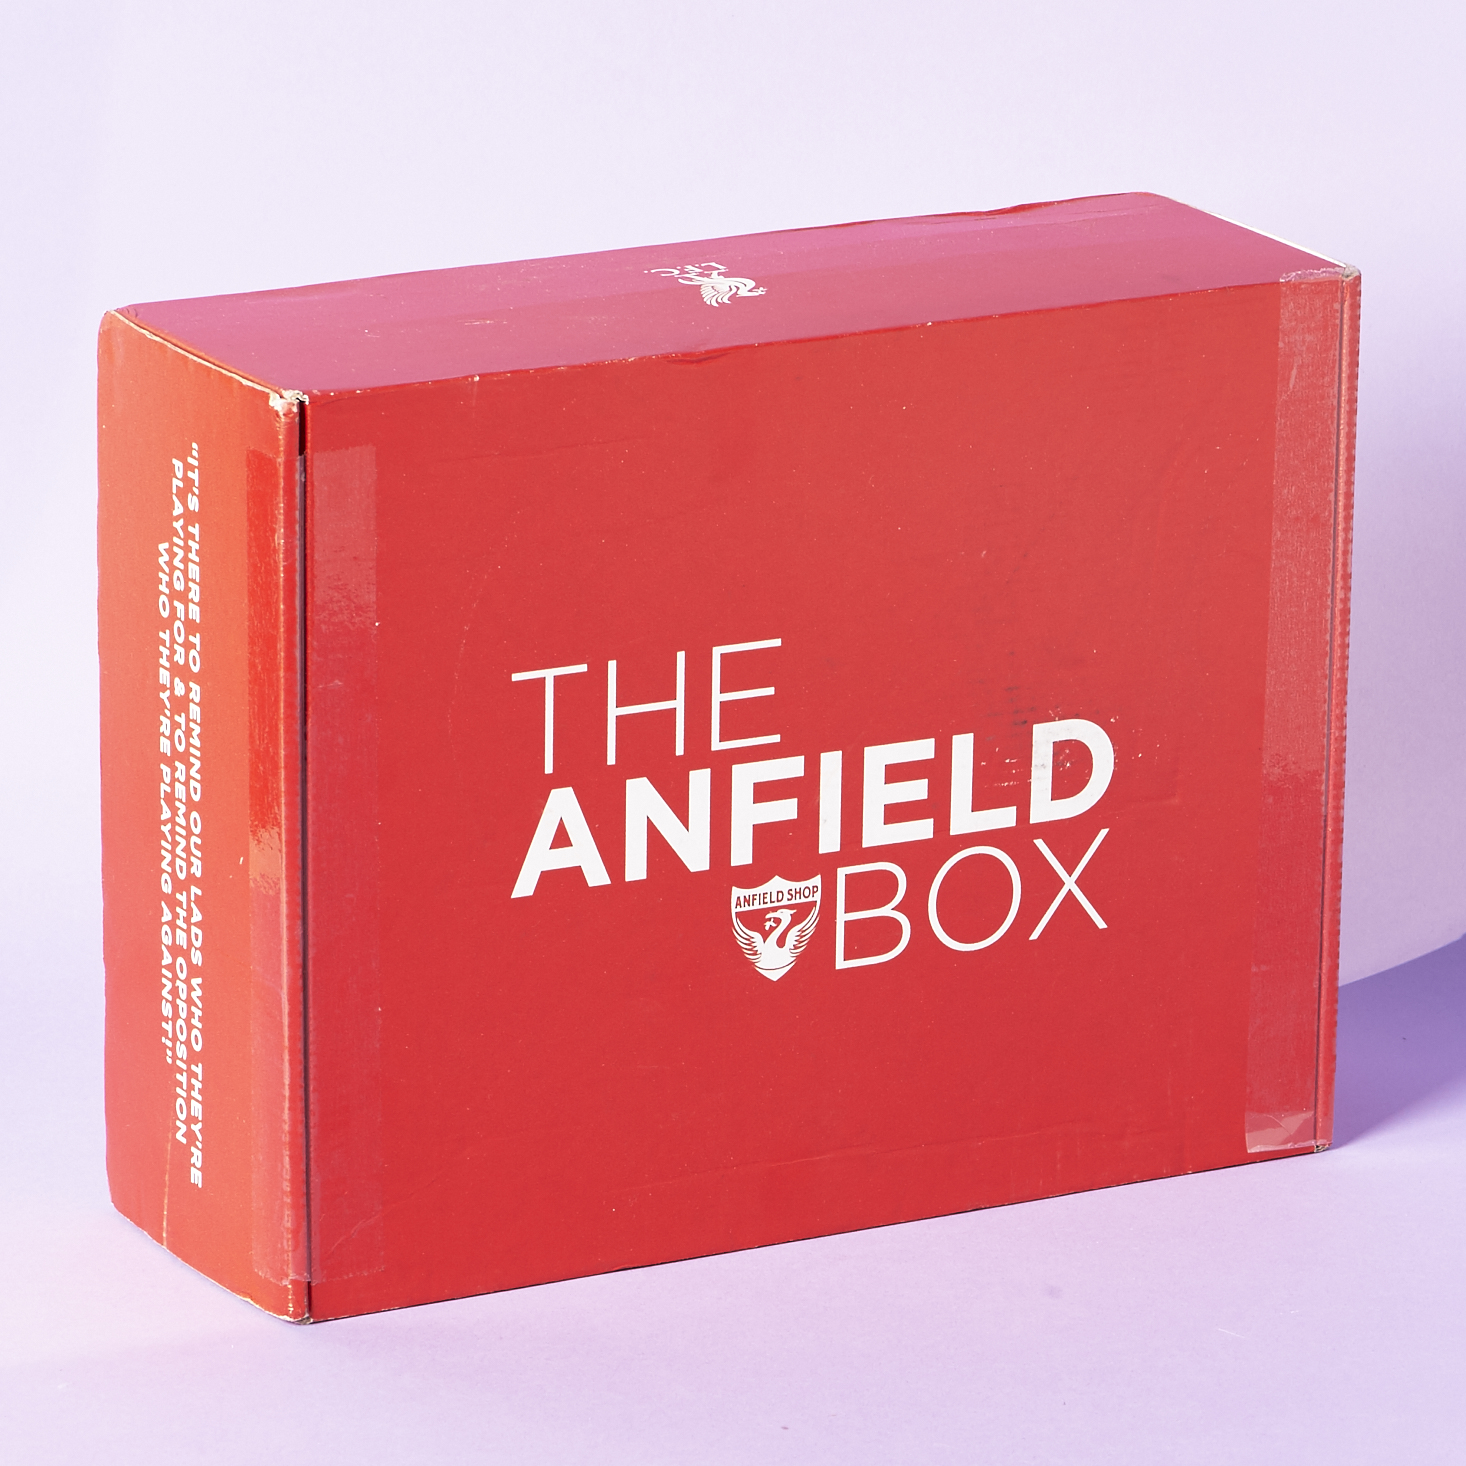 The Anfield Box Subscription Box Review – Fall 2016